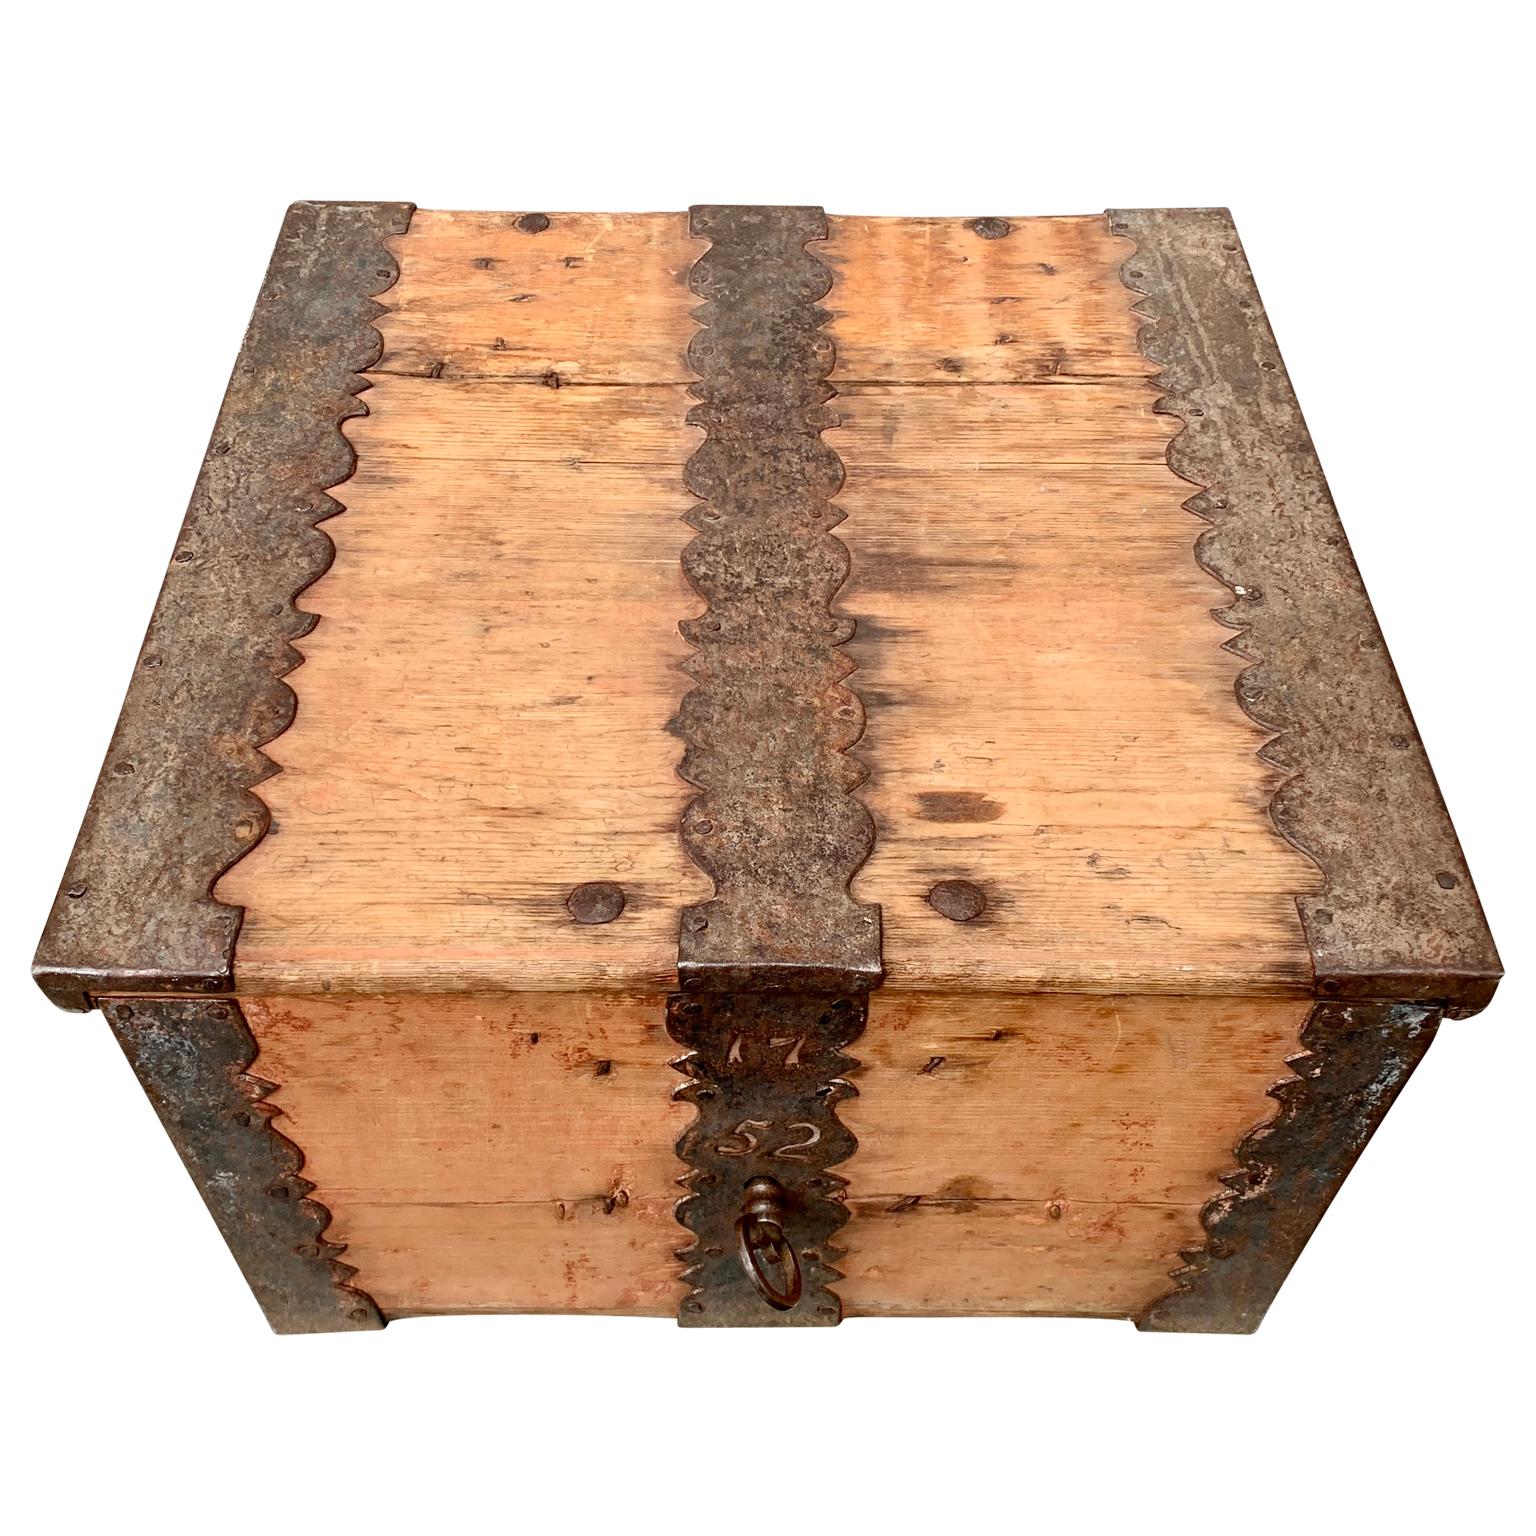 A Swedish Baroque box with original ironwork, key and big strong perfectly working lock dated (forged in the iron) 1752. This special shaped pine wood box,  bought in the region of 